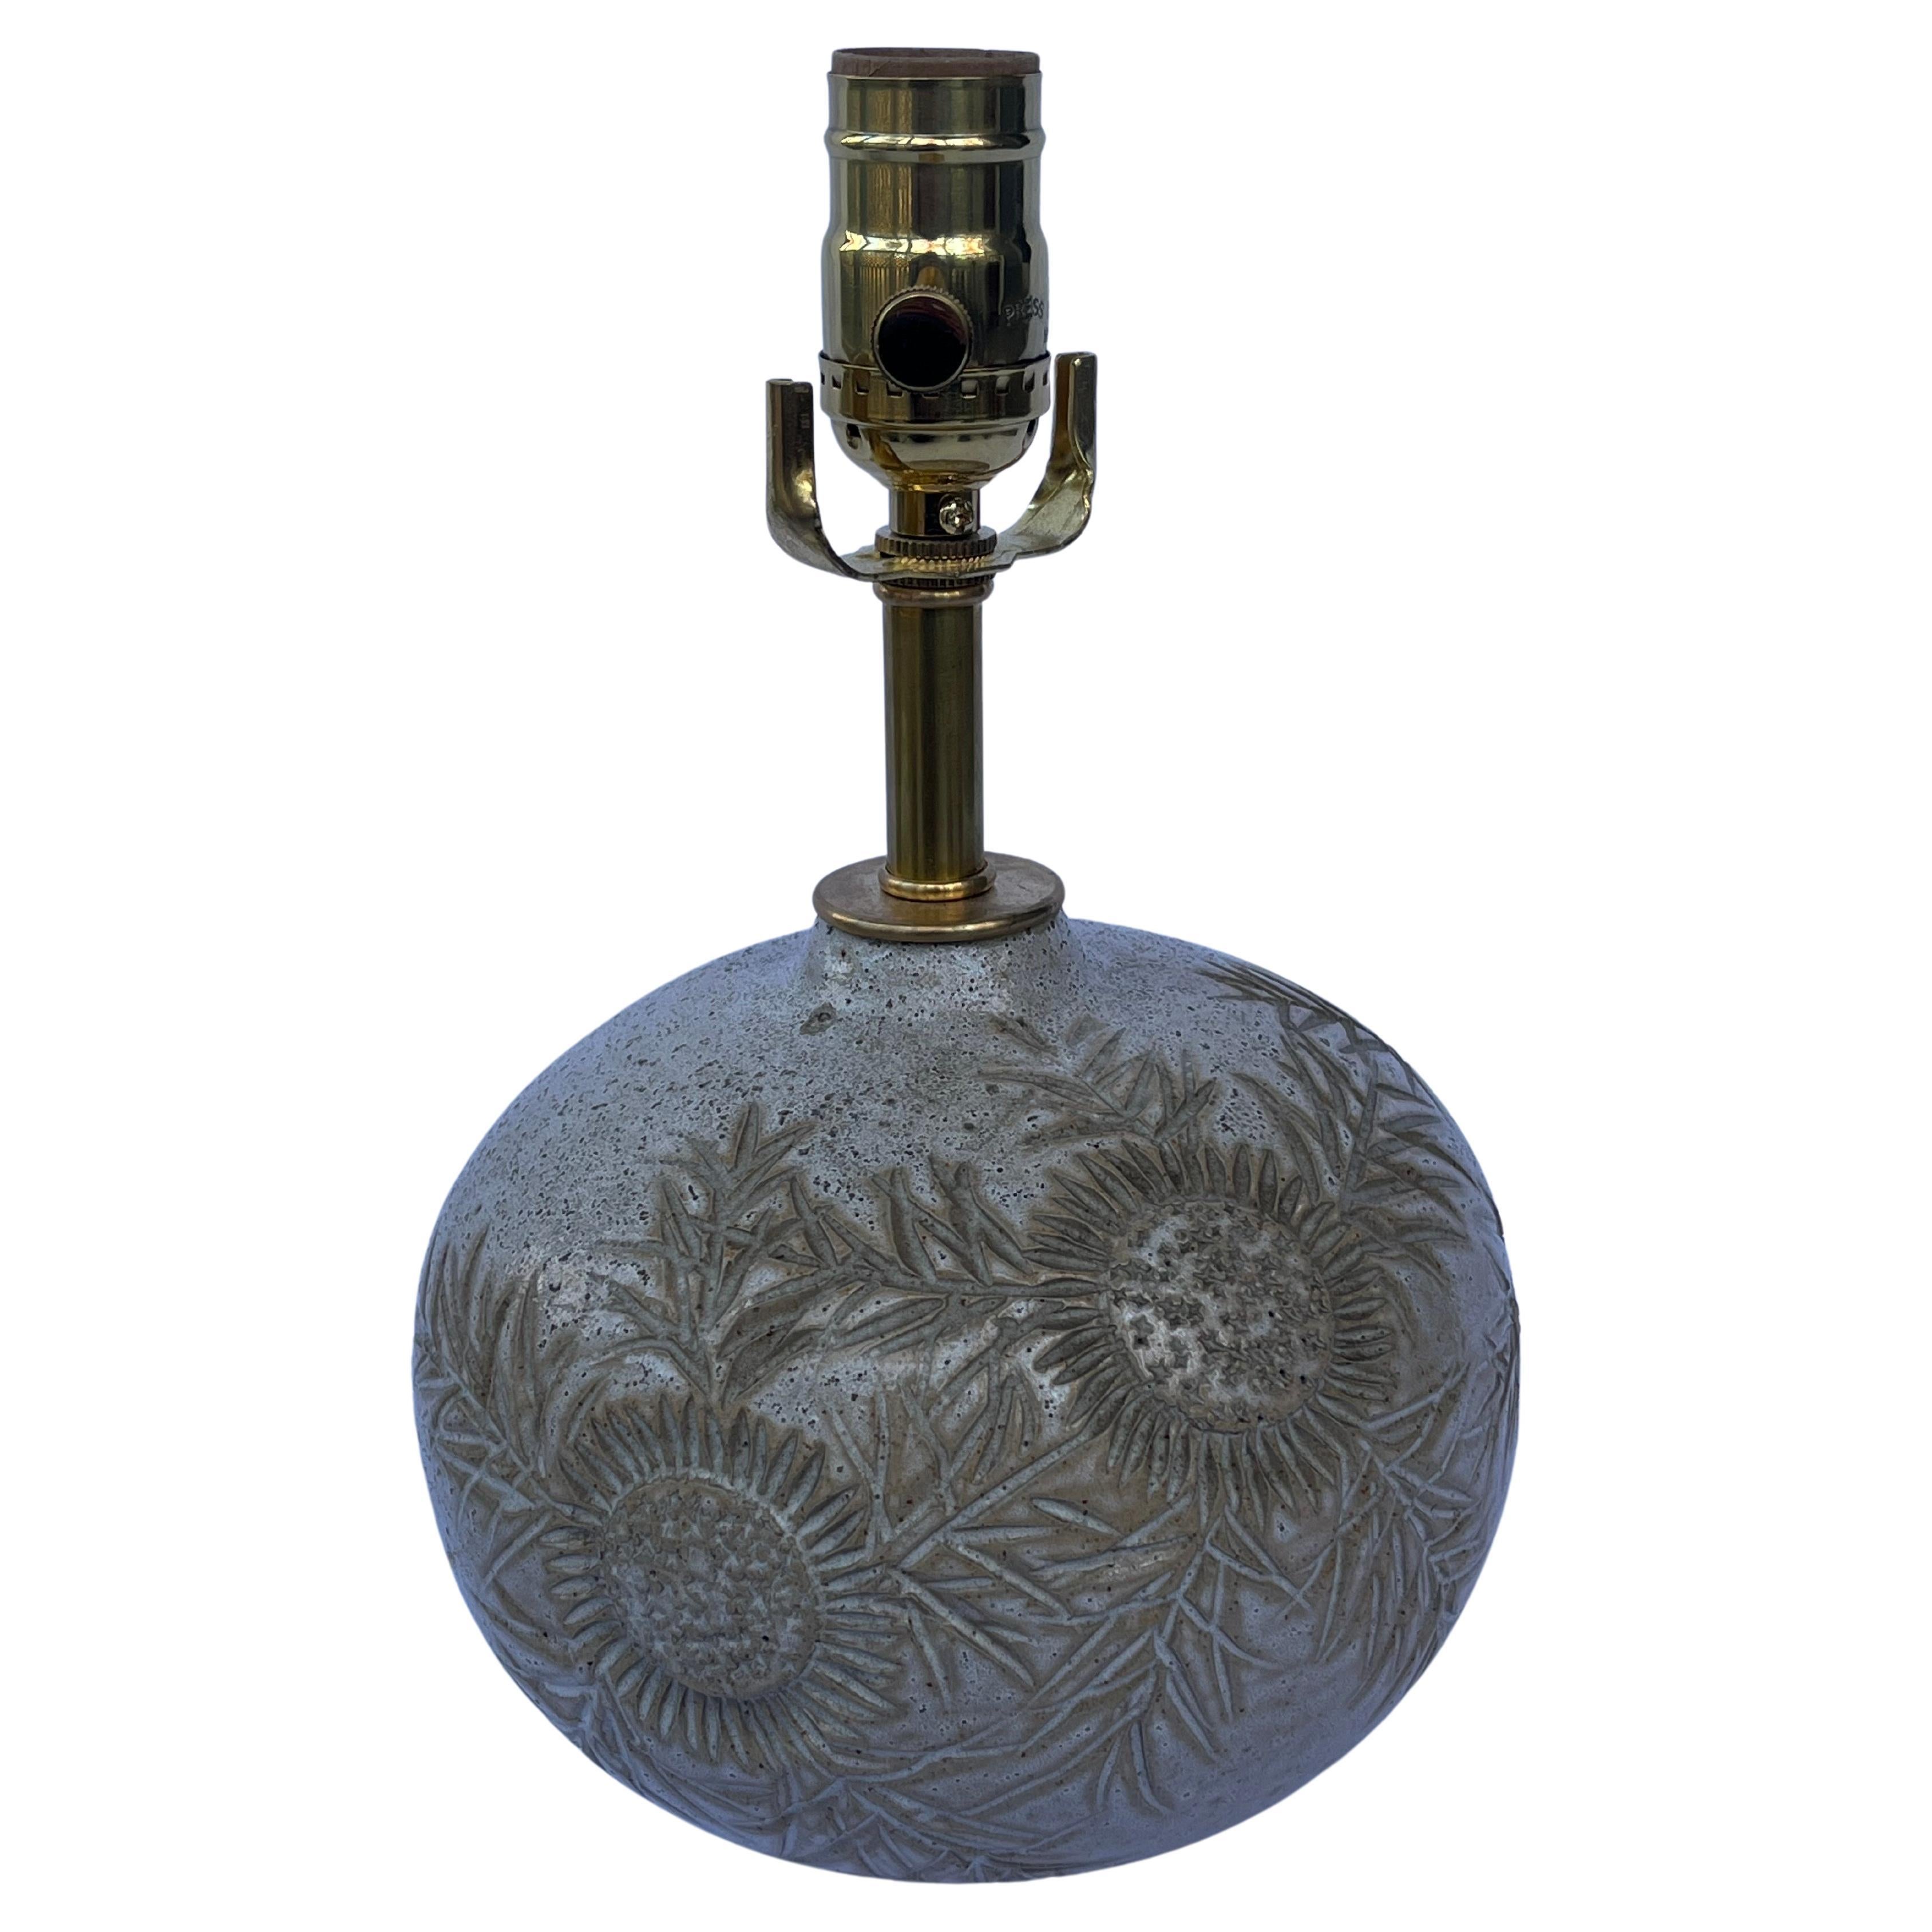 A beautifully crafted ceramic pottery table lamp by French artist Marius Bessone. This pottery vessel has a thistle design. In the Basque region of France, the thistle symbolizes protection and is often hung on a doorway or entryway. The petite